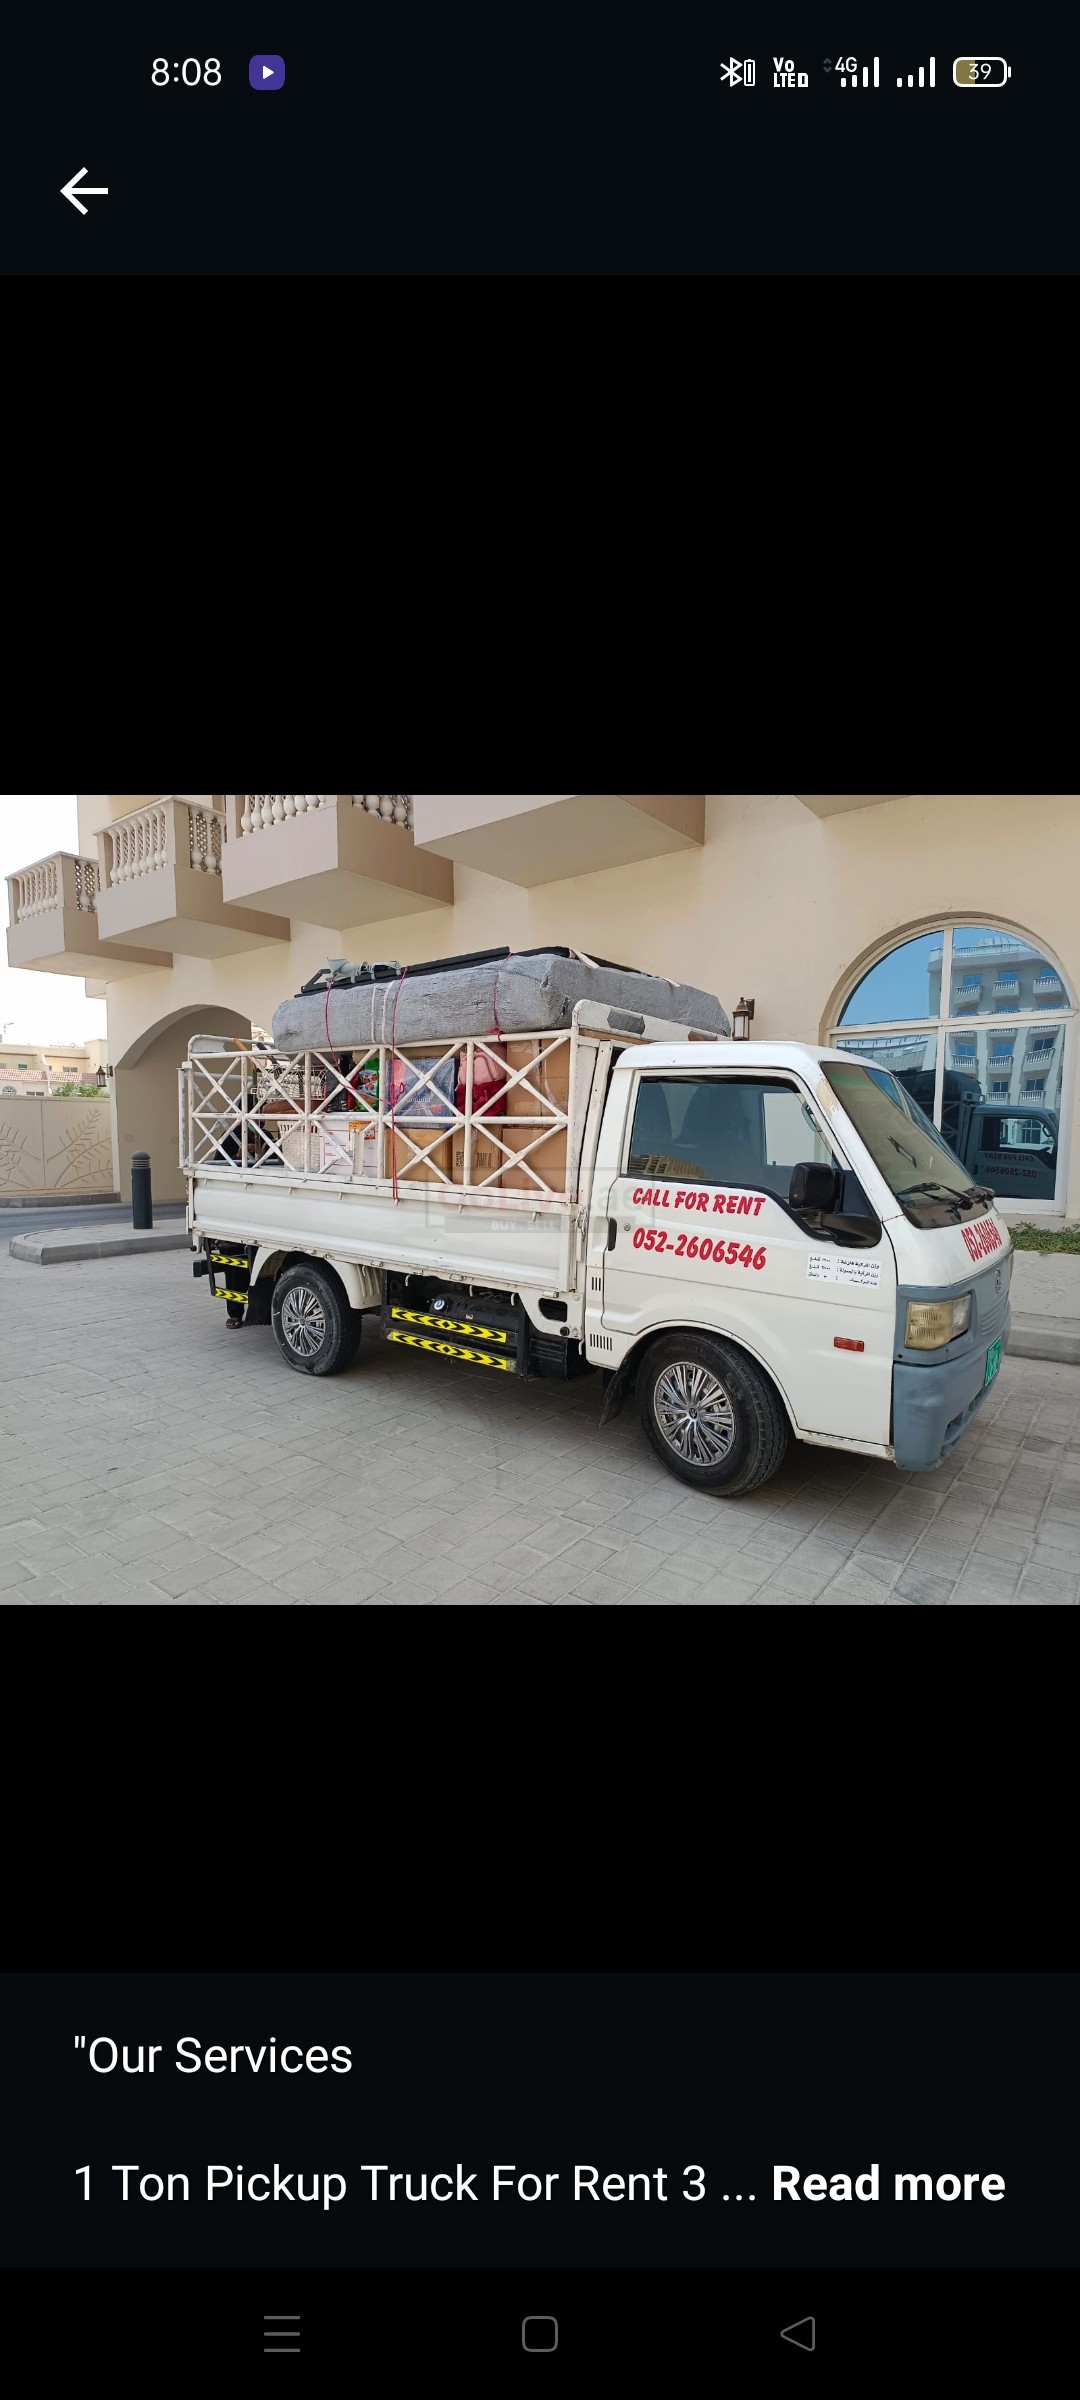 Movers and Packers in Town secure